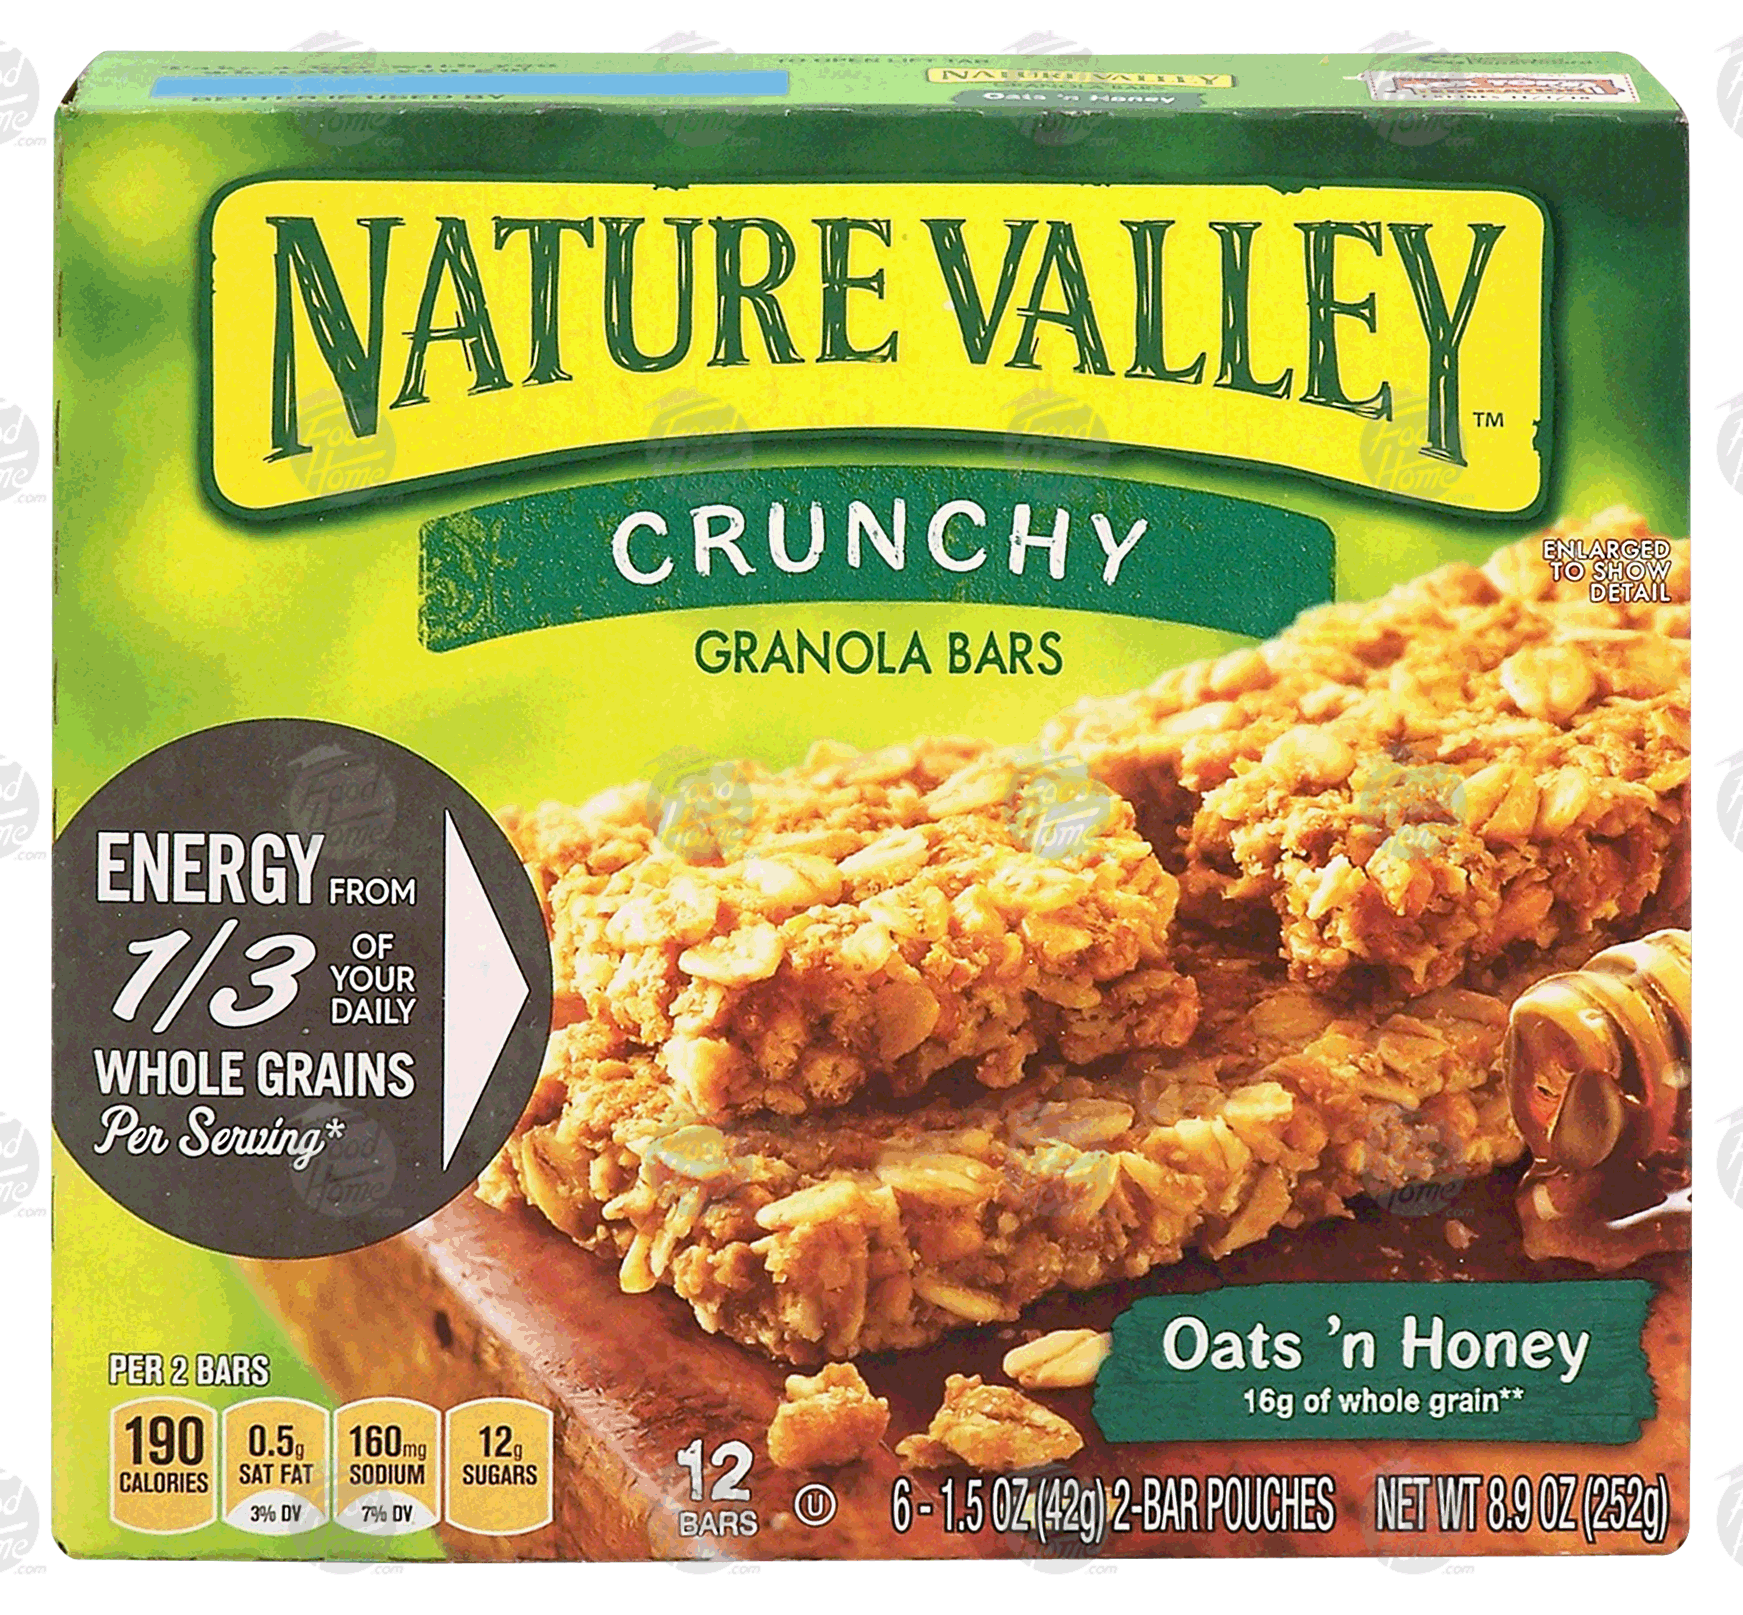 Nature Valley  oats 'n' honey crunchy granola bars, 6- 2 bar pouches Full-Size Picture